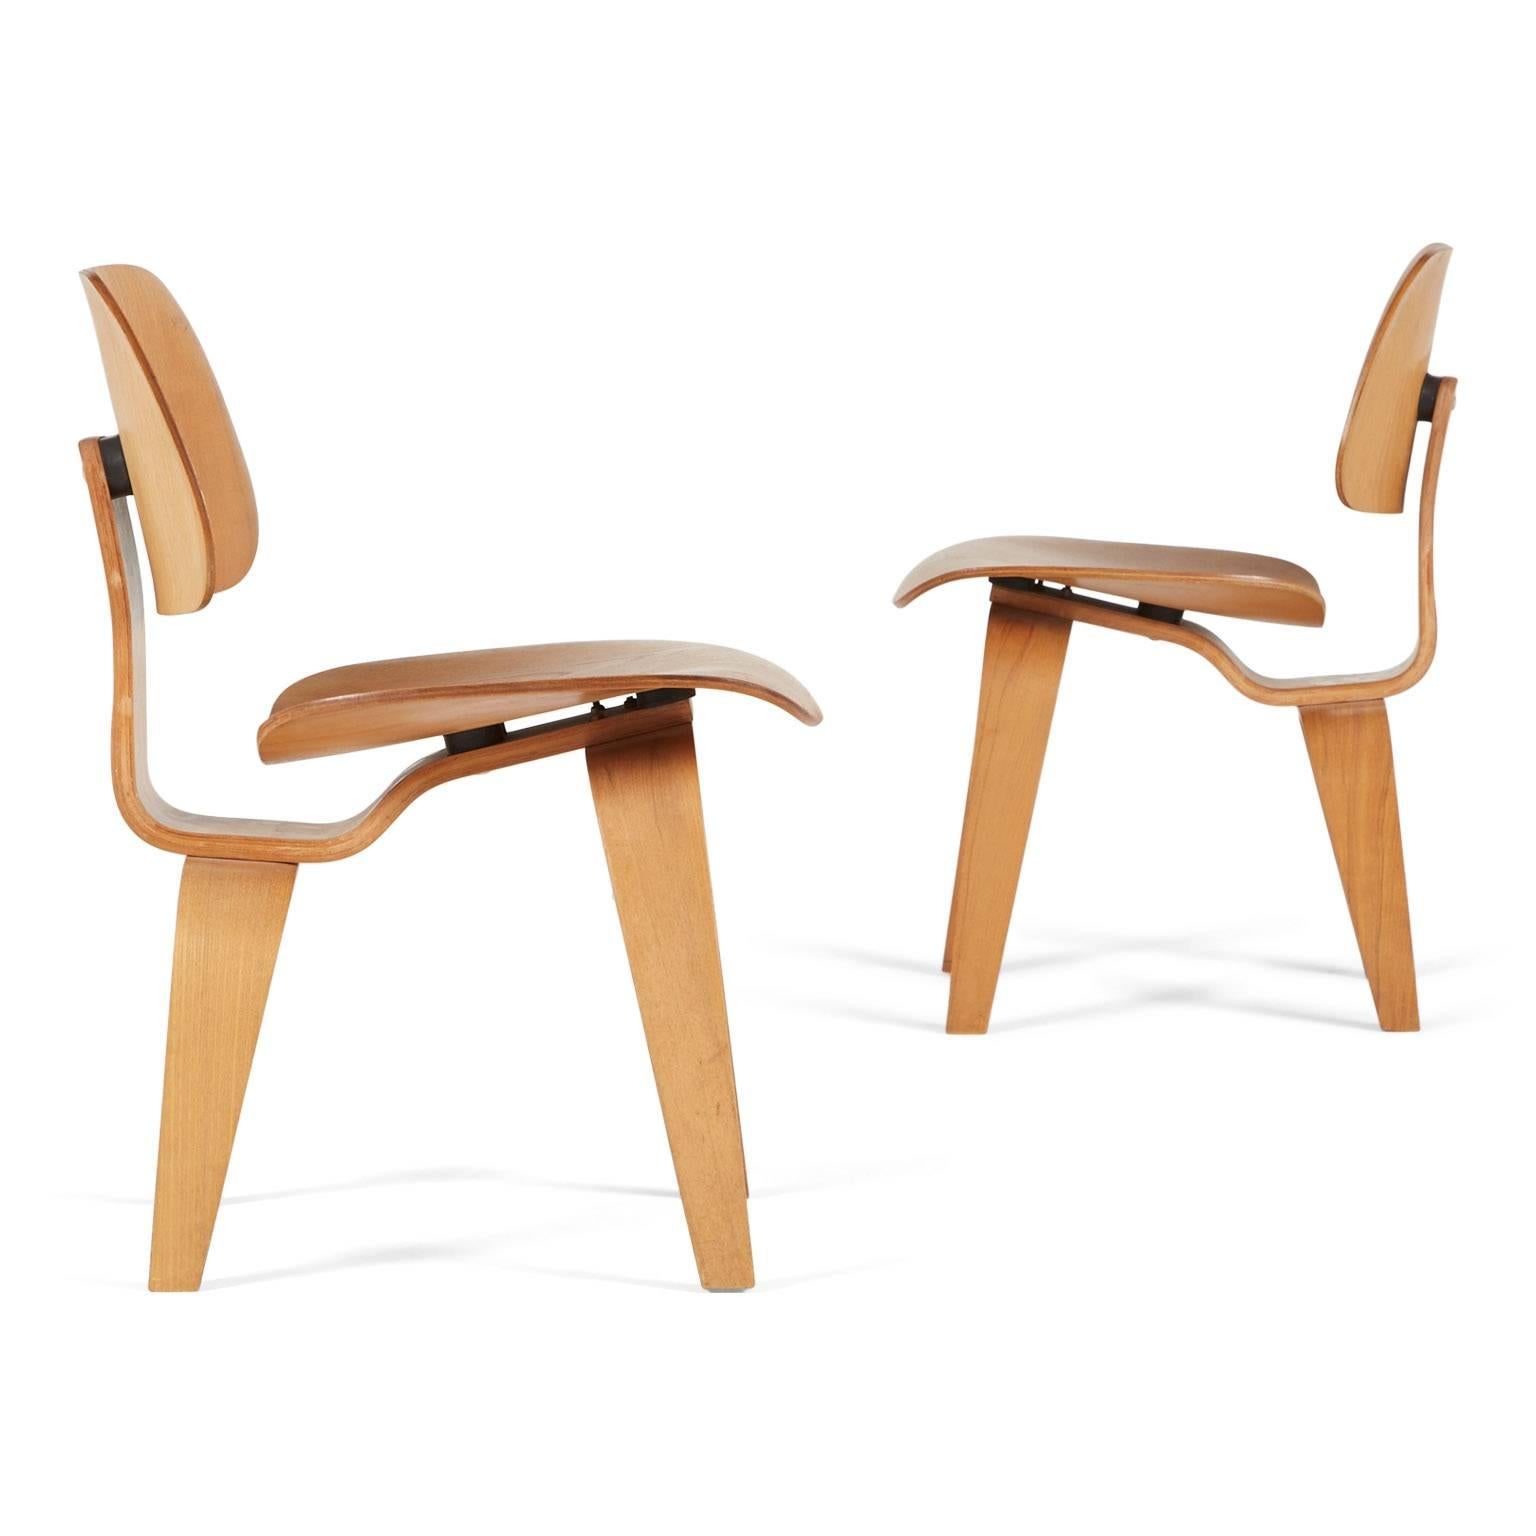 This pair of early example DCW's feature the 5-2-5 screw configuration as well as original three-part Evans labels. 

Evans Products Company manufactured The Eames molded plywood chairs from 1946 through 1949. Thereafter Herman Miller took over